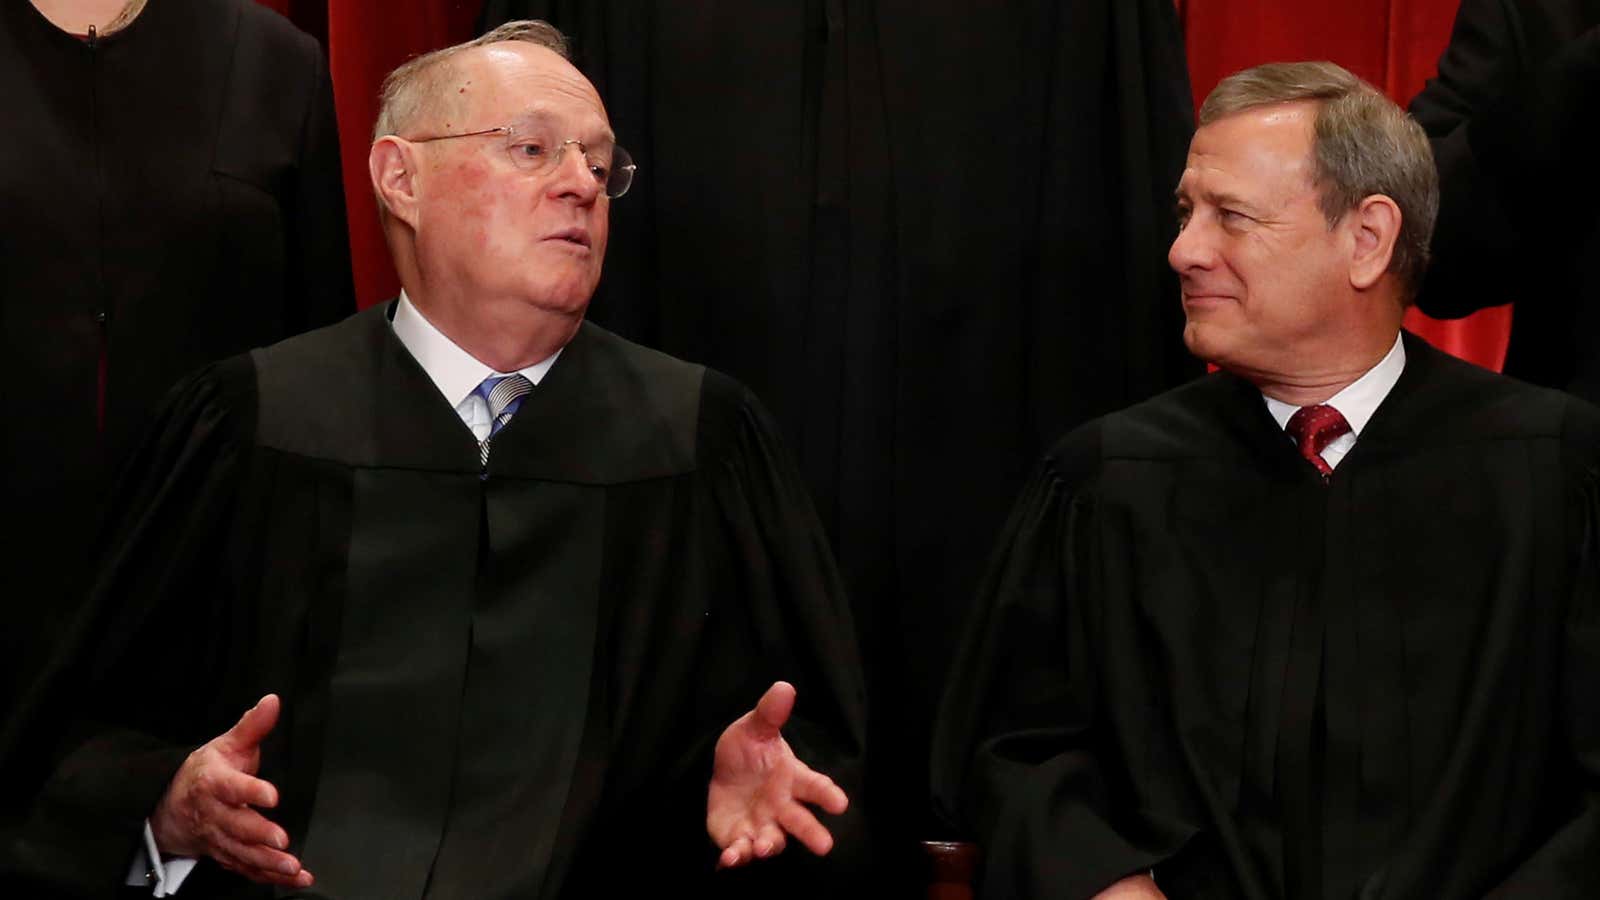 Chief justice John Roberts (right) talks with justice Anthony Kennedy (left) during a photo shoot at the United States Supreme Court.